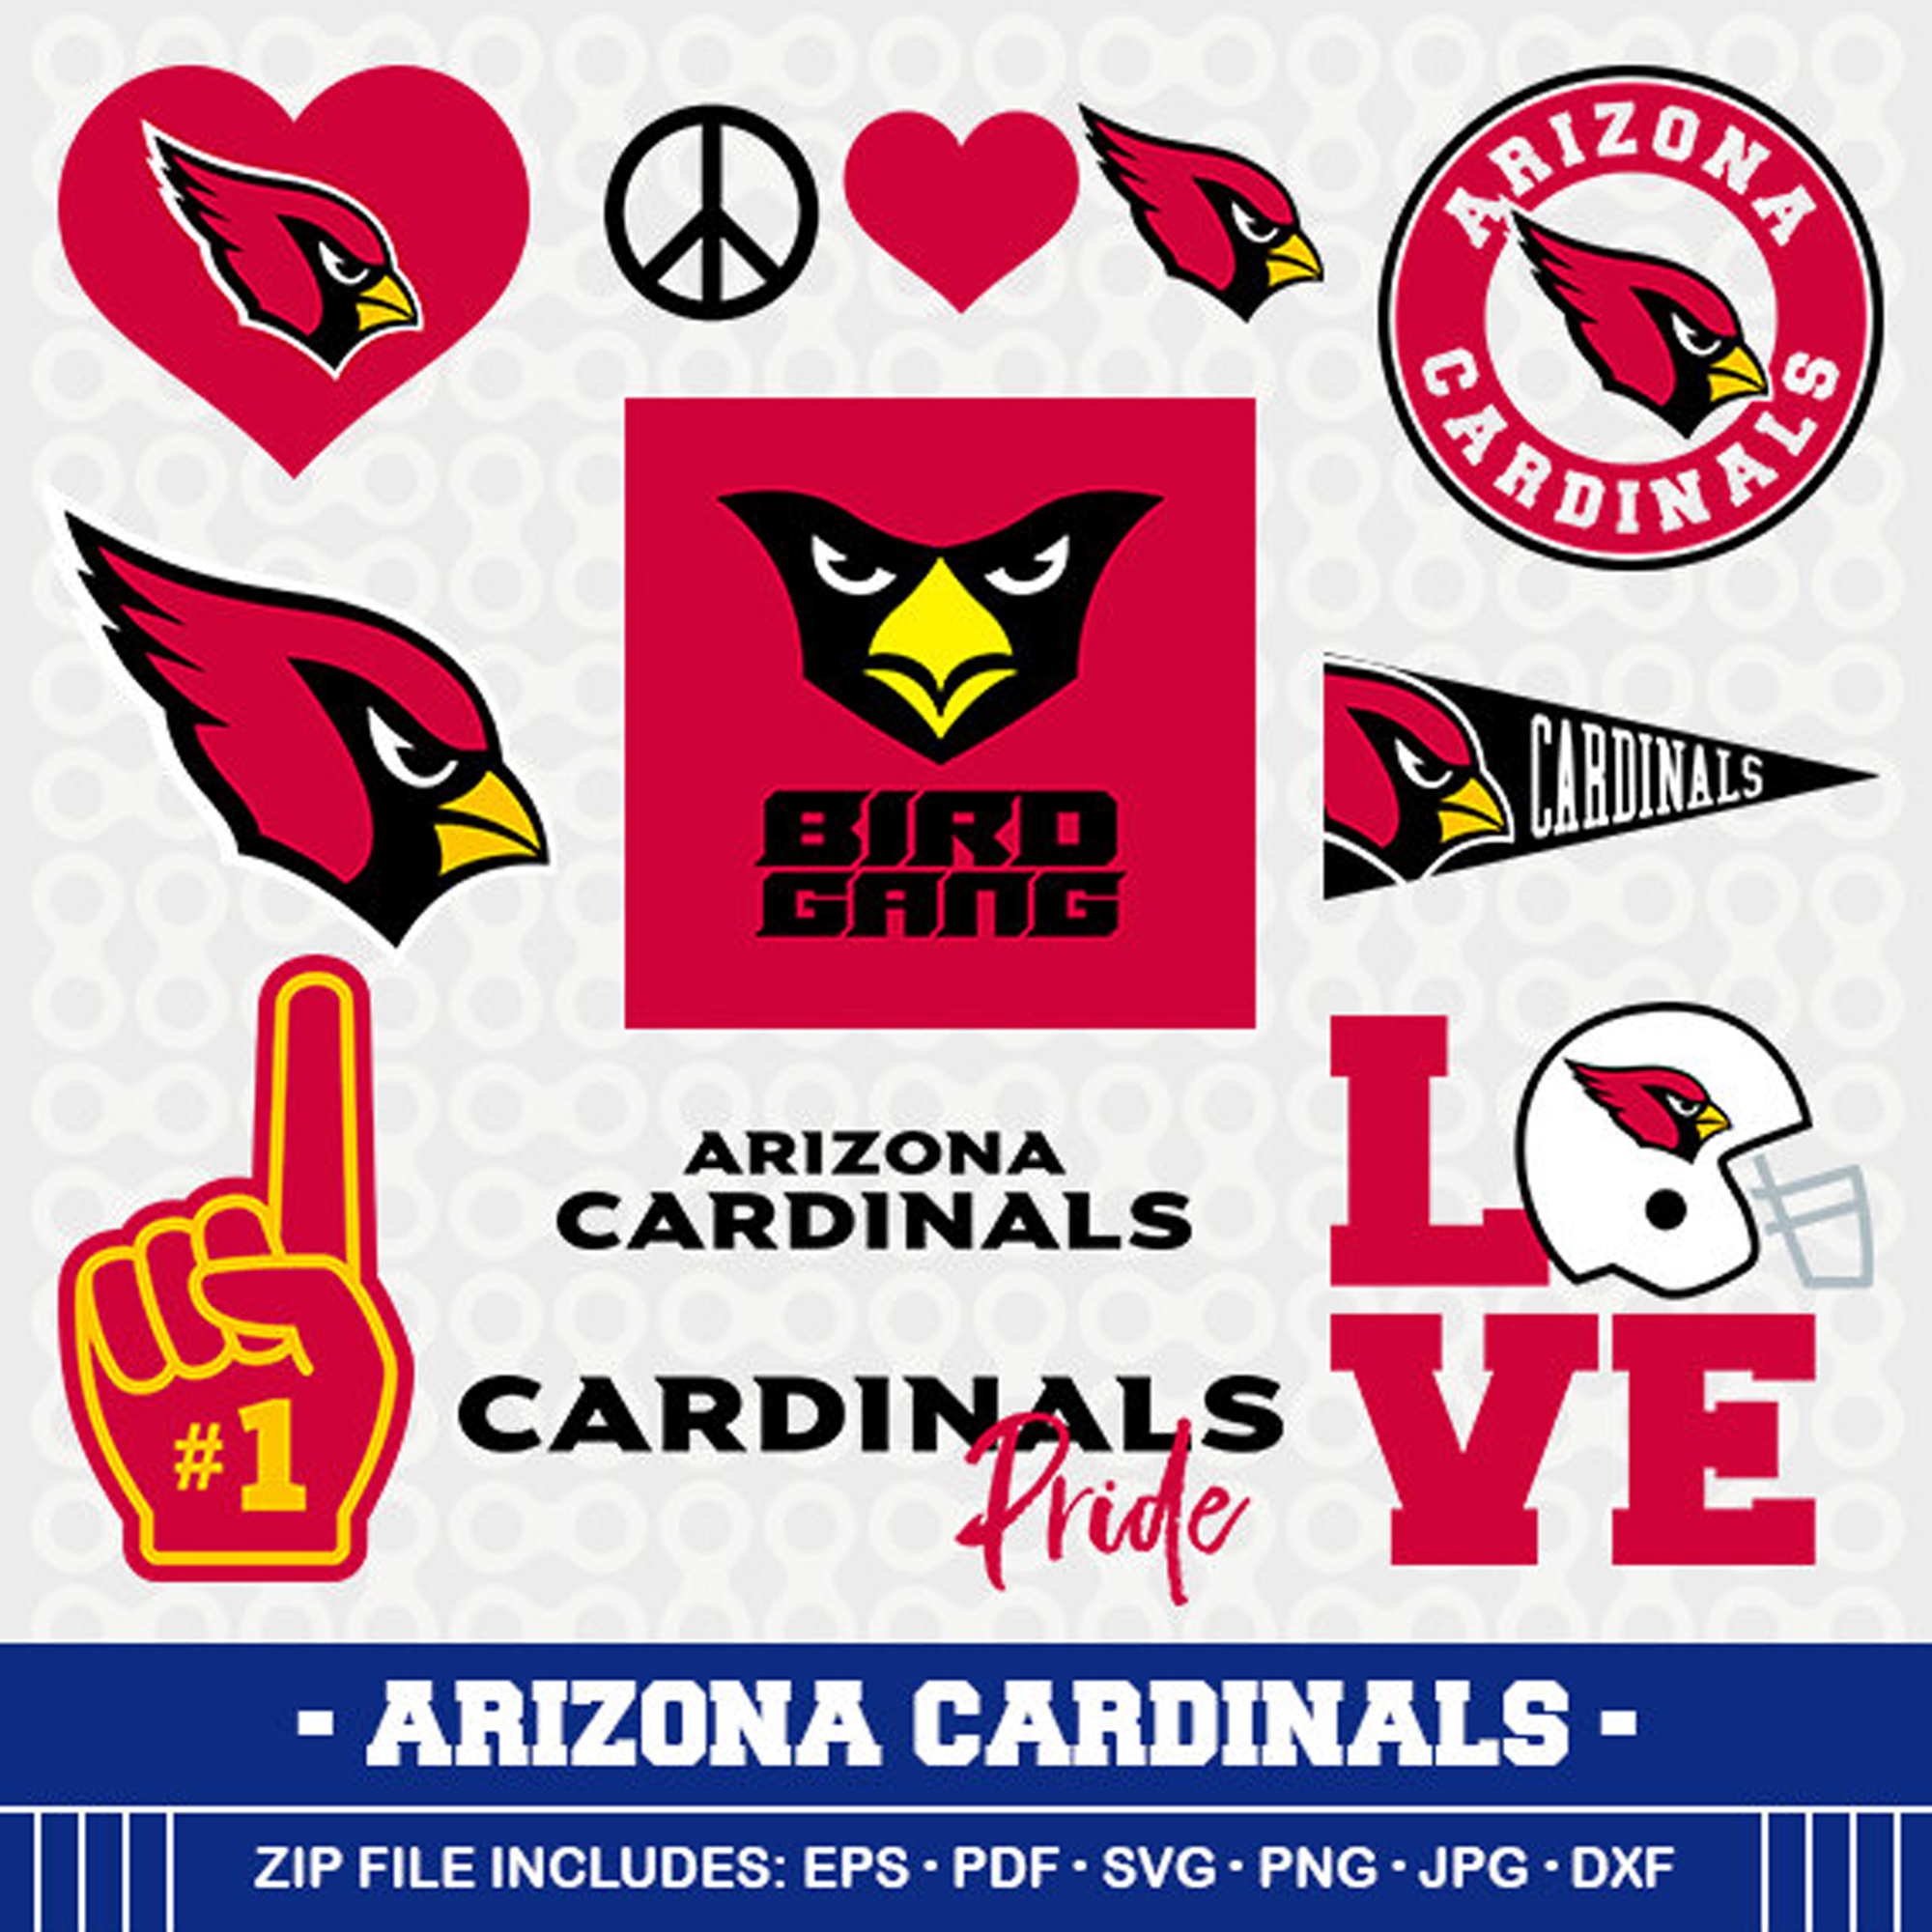 Super Bowl LV: Tampa Bay Buccaneers SVG, DXF, PNG, and EPS Cricut-Silh – Da  Goodie Shop Unleashed